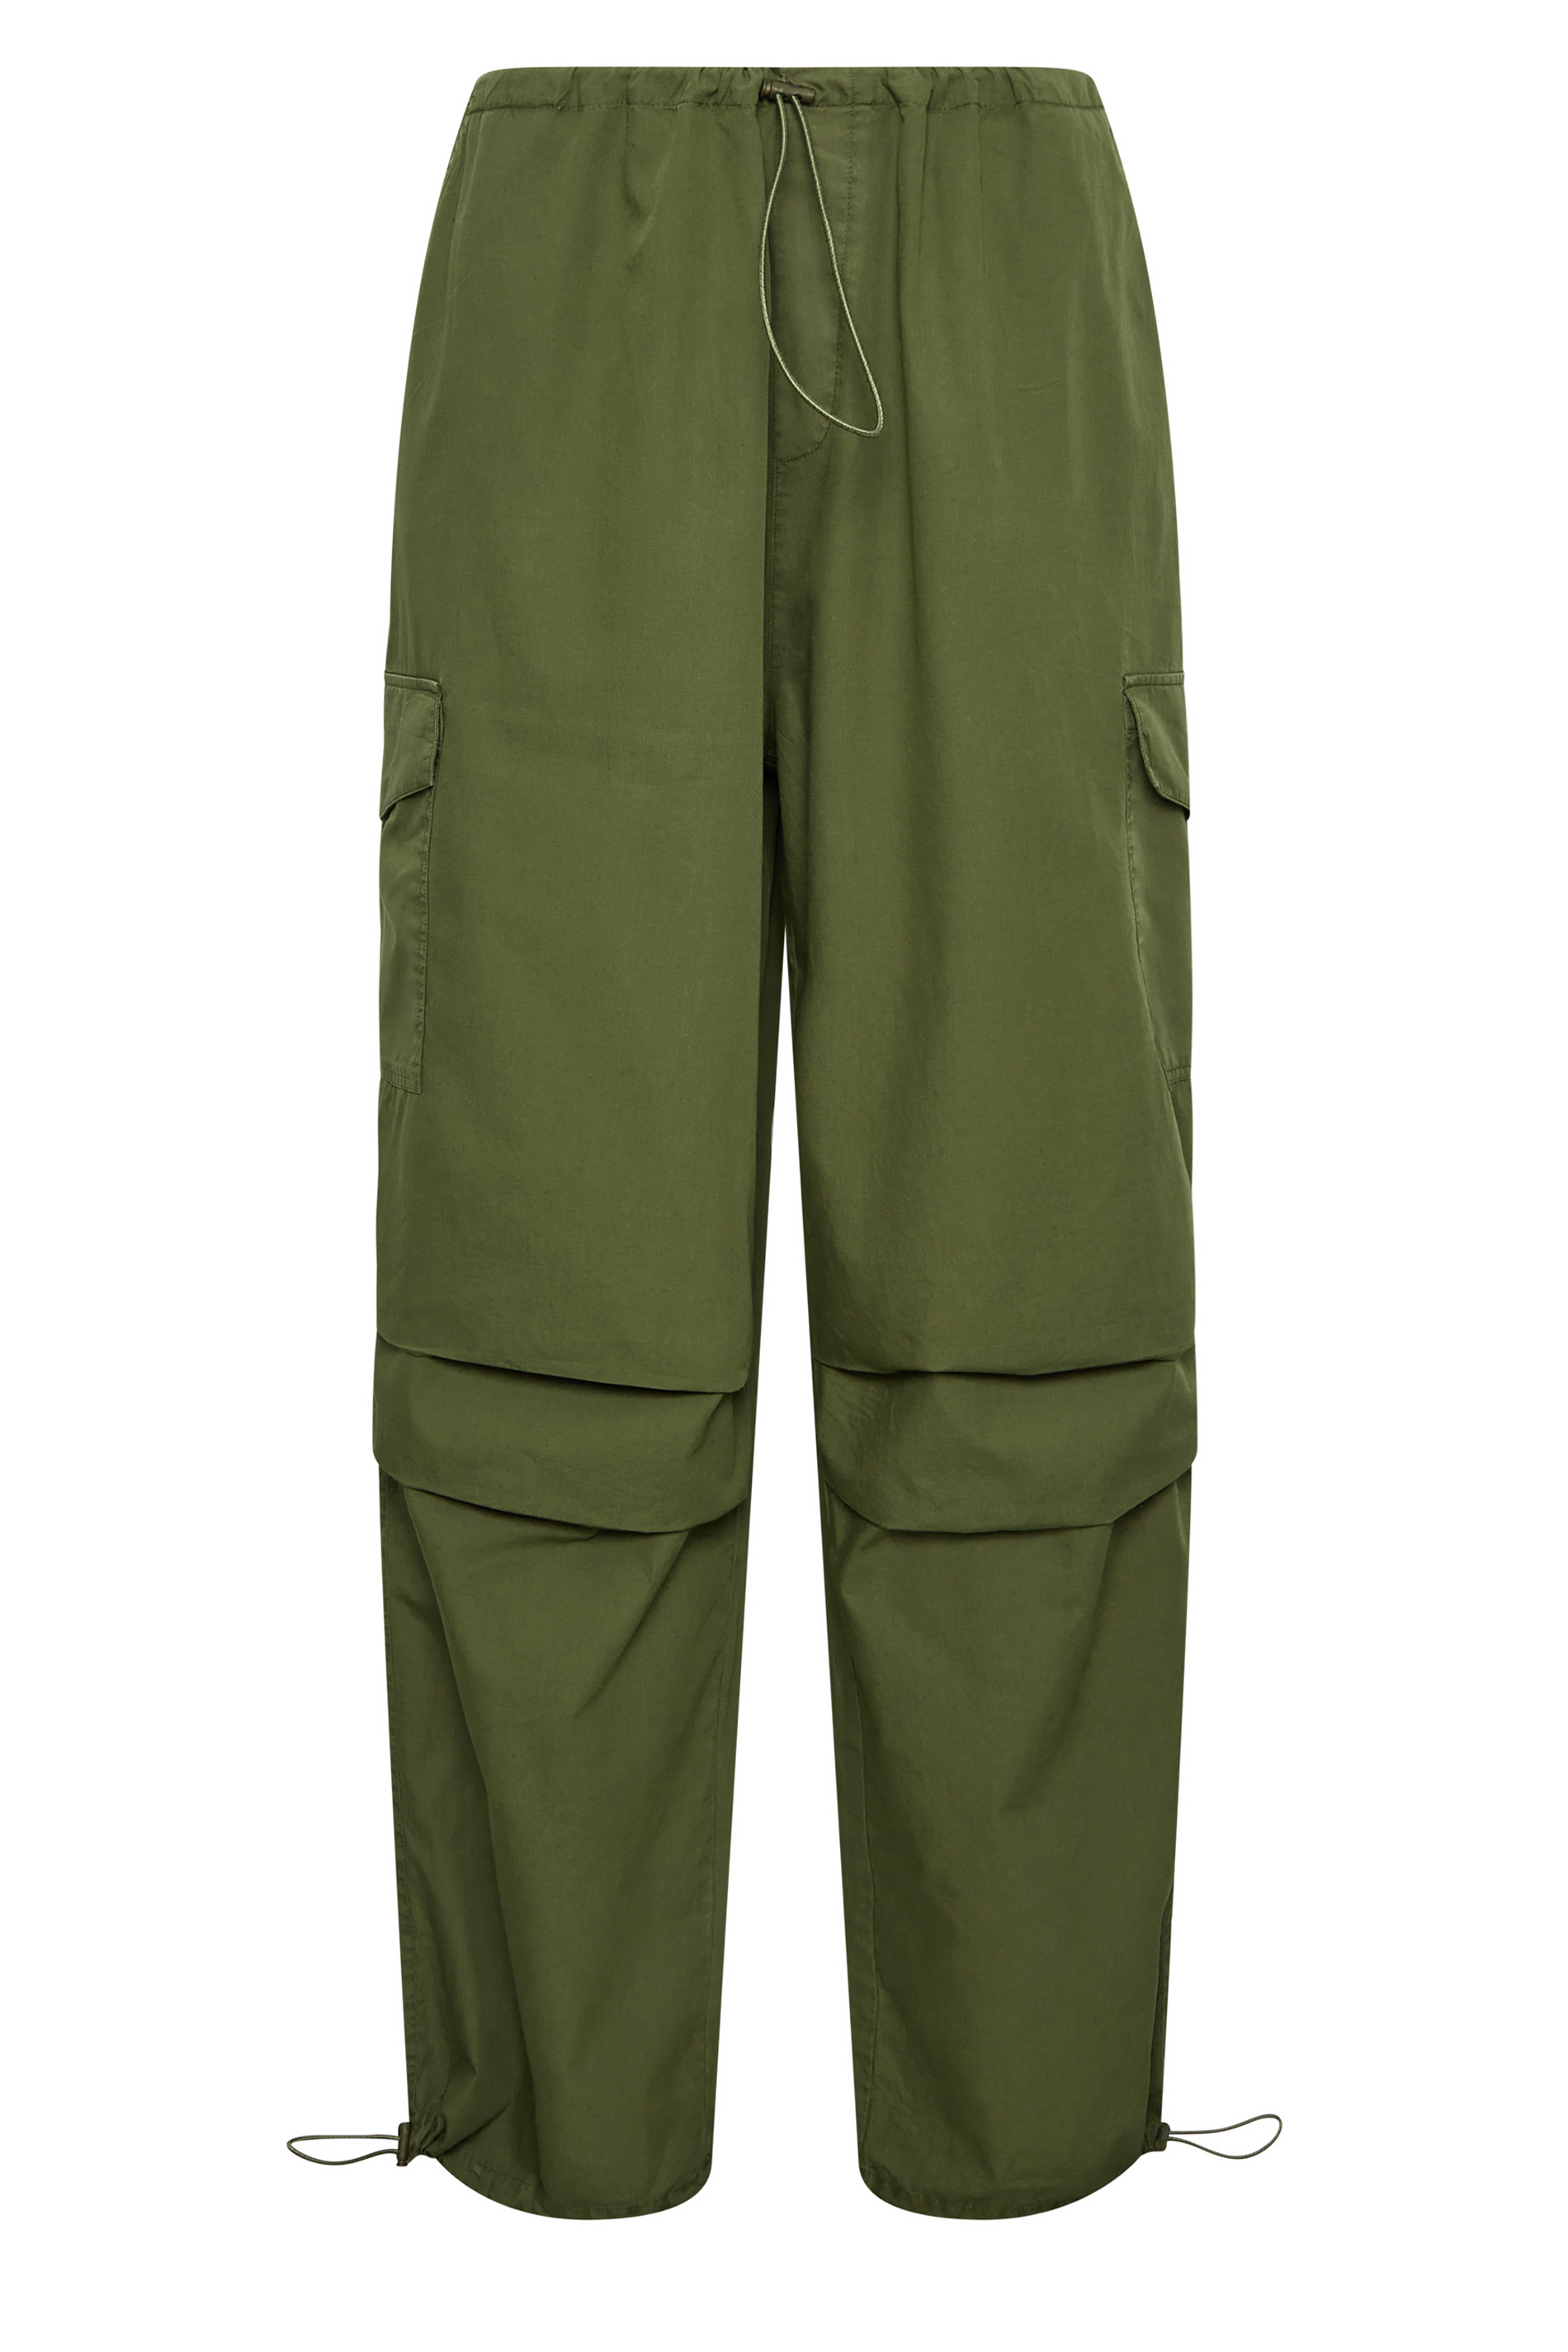 YOURS Curve Plus Size Khaki Green Cargo Parachute Trousers | Yours Clothing